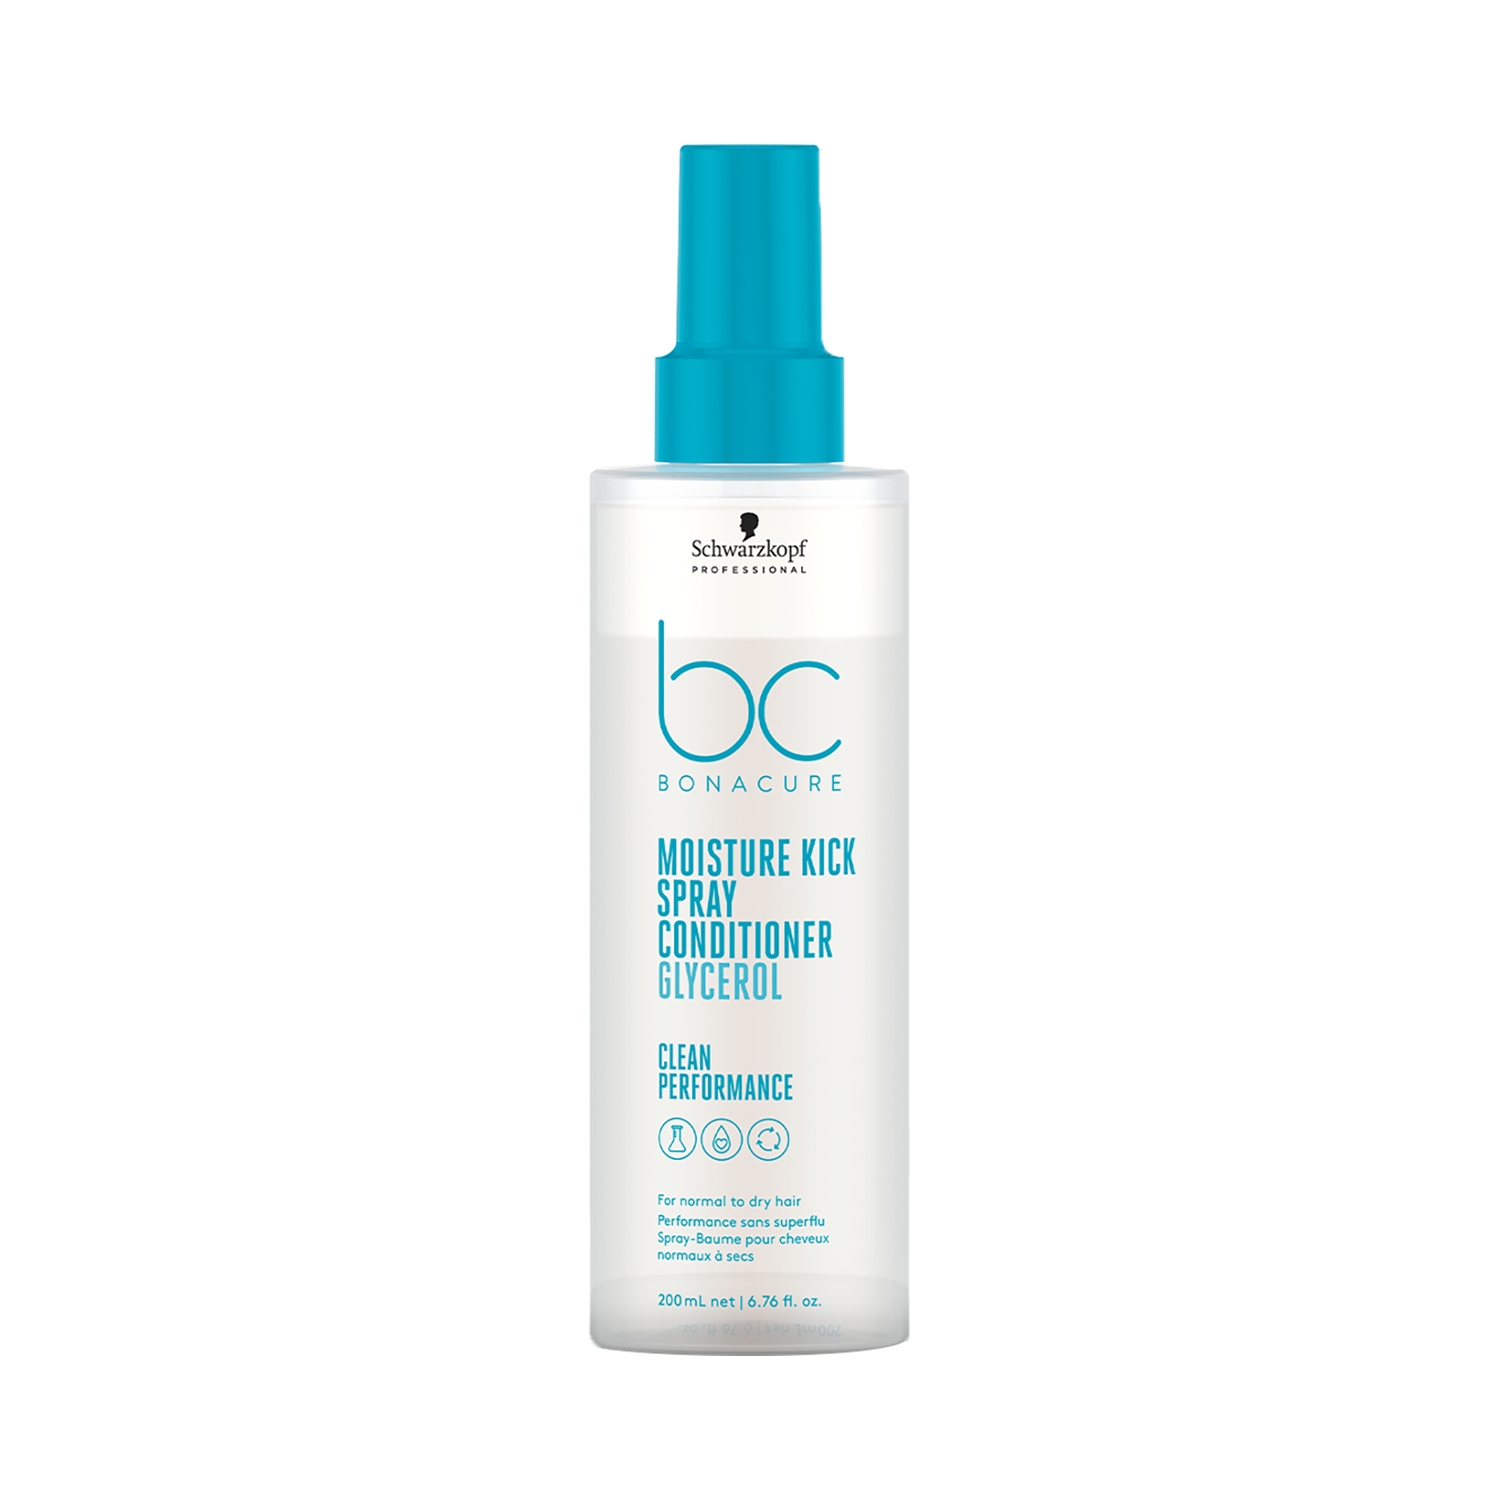 Schwarzkopf Professional | Schwarzkopf Professional Bonacure Moisture Kick Spray Conditioner With Glycerol For Dry Hair (200ml)